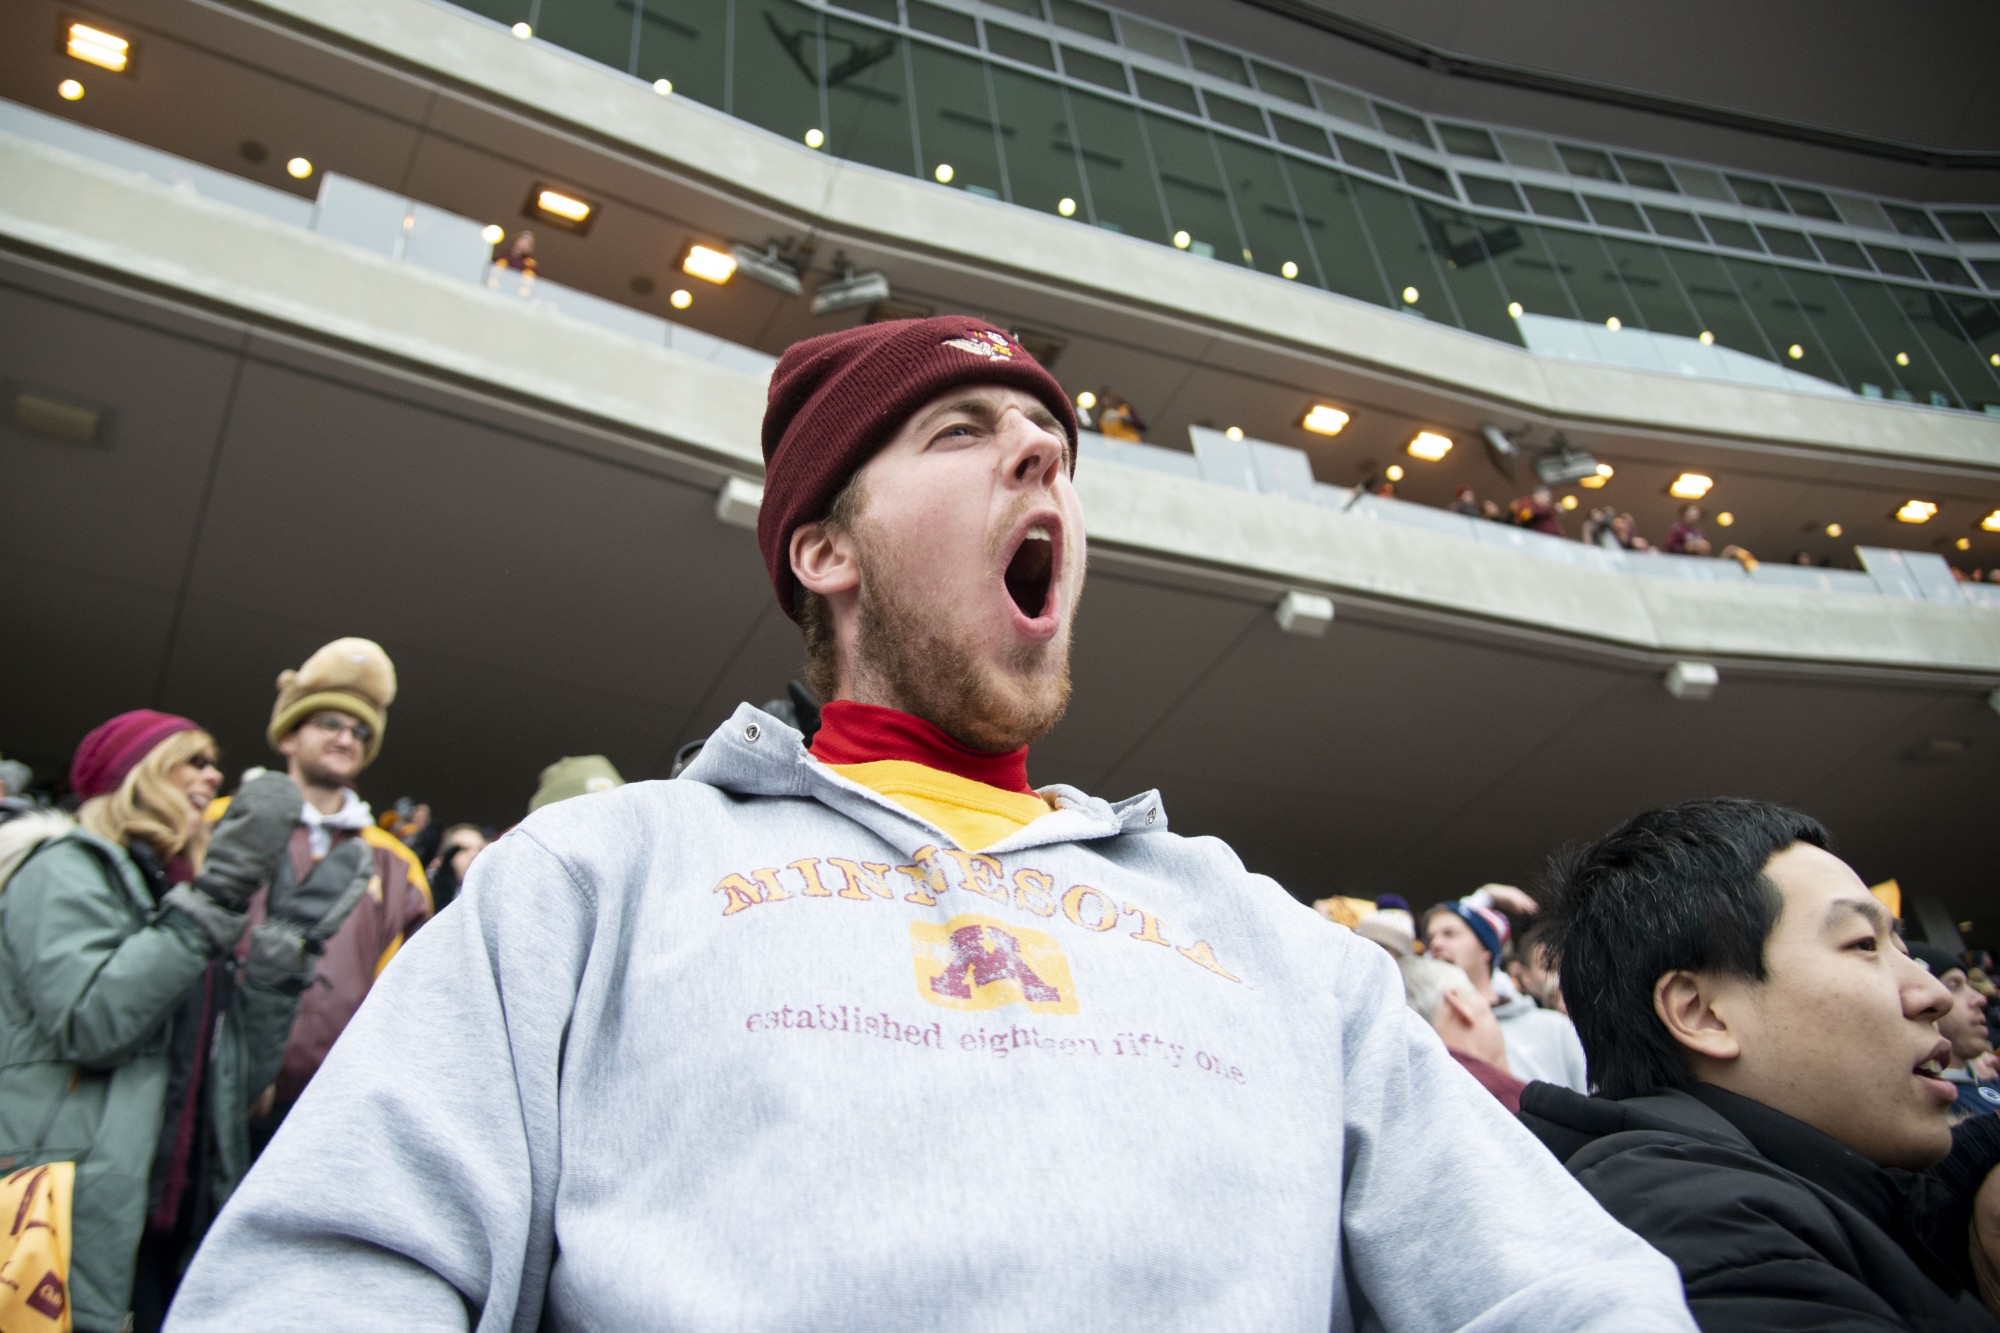 A fan cheers for the Gophers during the game against Penn State at TCF Bank Stadium Saturday, Nov. 9. The Gophers won 31-26 bringing their record to 9-0. A first since 1904.